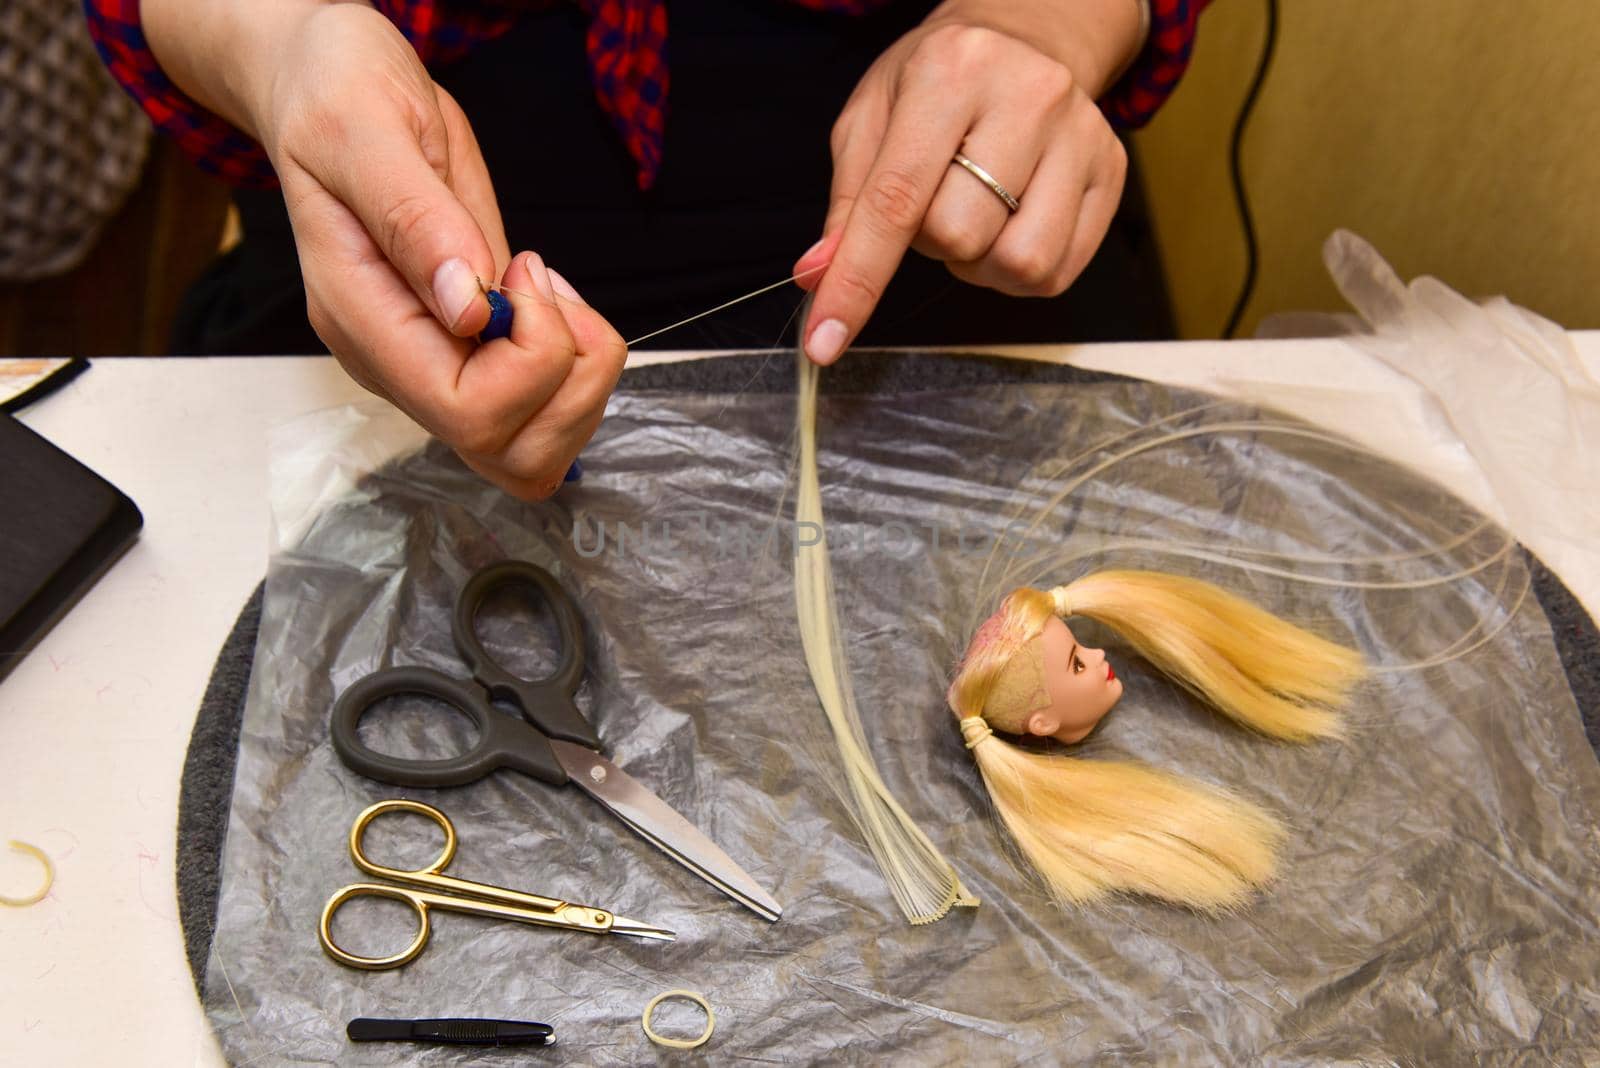 female hands and homemade tool on the table, how to make a hairstyle for a doll, hobby concept.